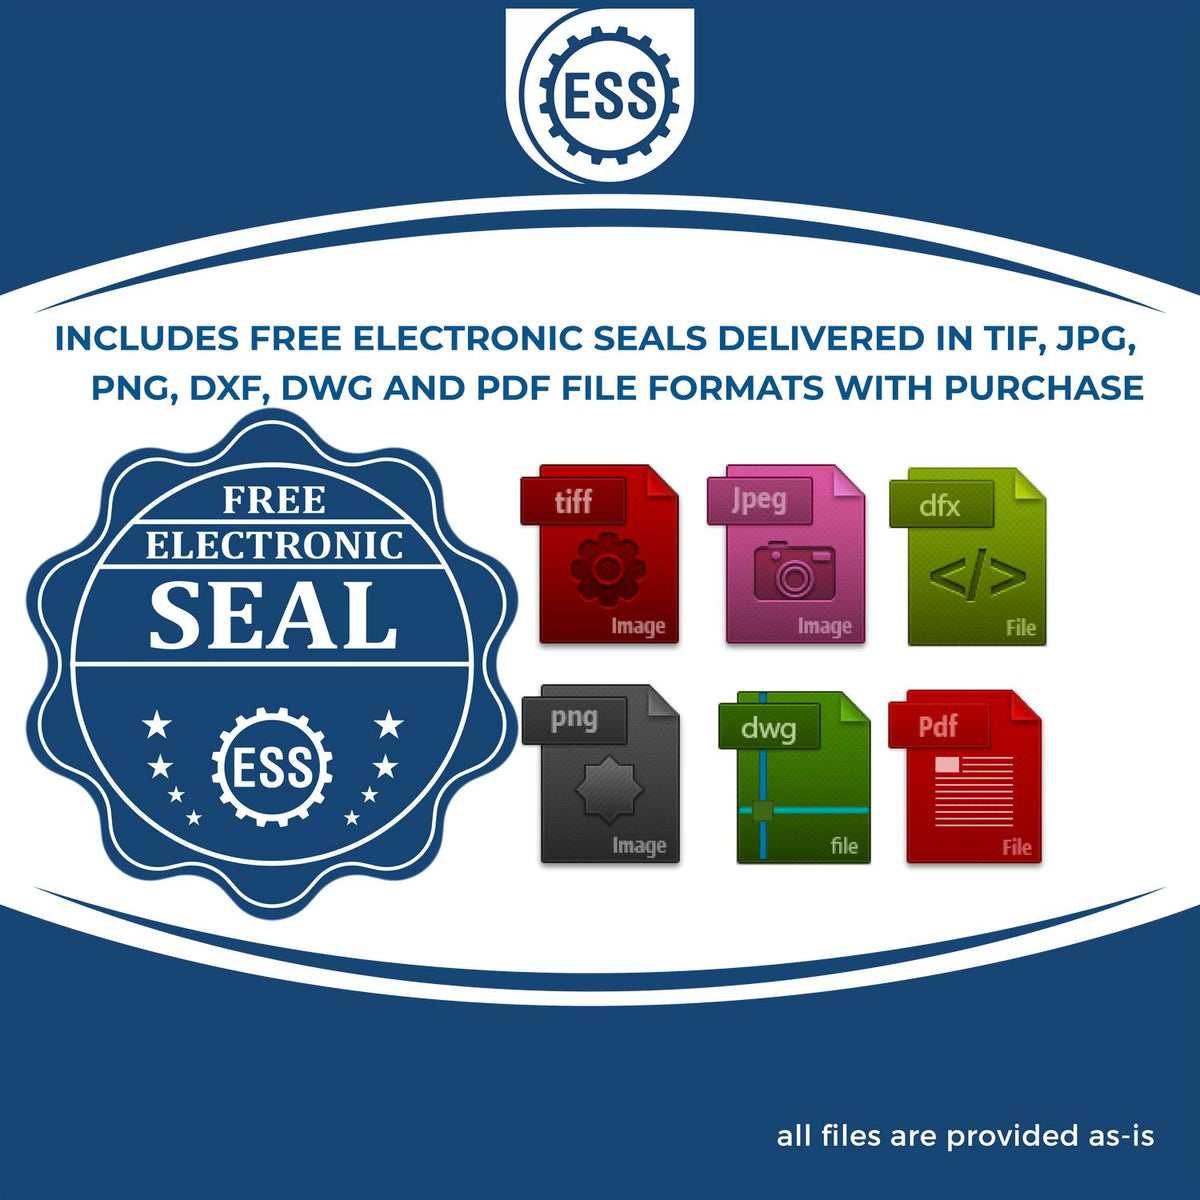 An infographic for the free electronic seal for the Self-Inking State Seal Vermont Notary Stamp illustrating the different file type icons such as DXF, DWG, TIF, JPG and PNG.